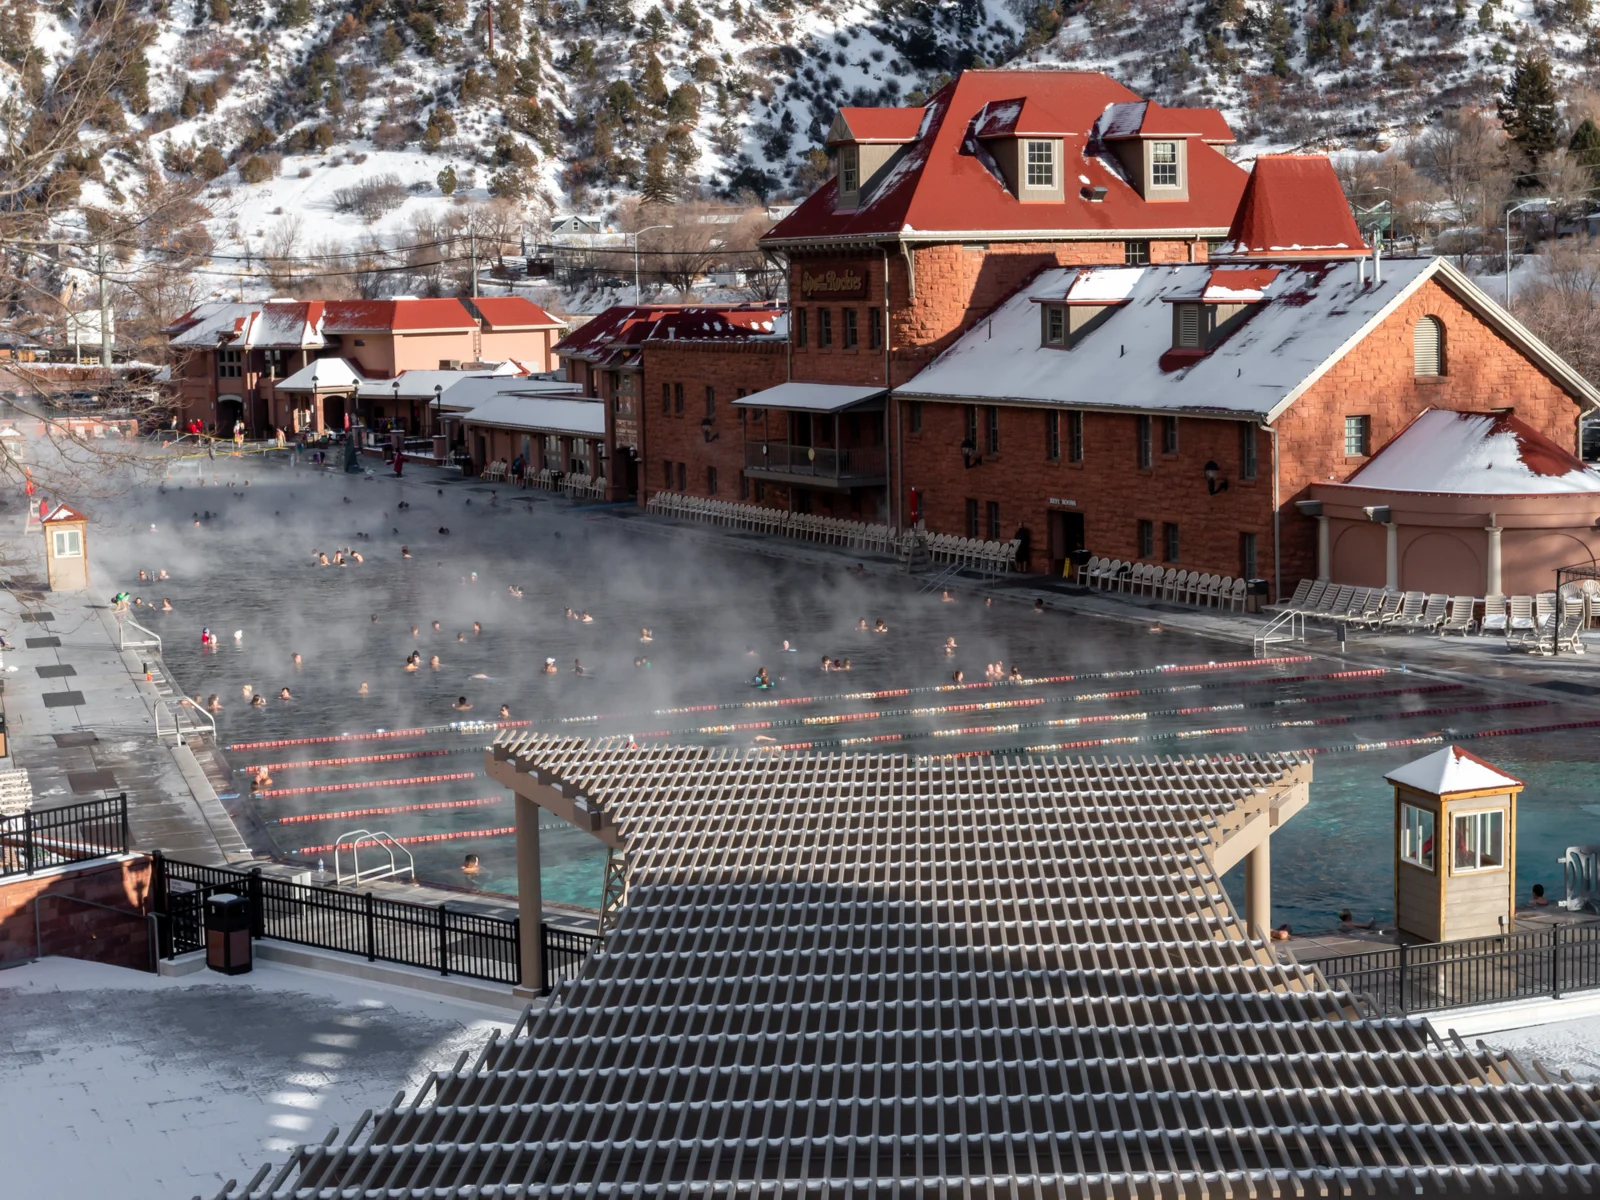 People sitting in the Glenwood Springs, one of the best hot springs in Colorado, while snow is on the ground all around